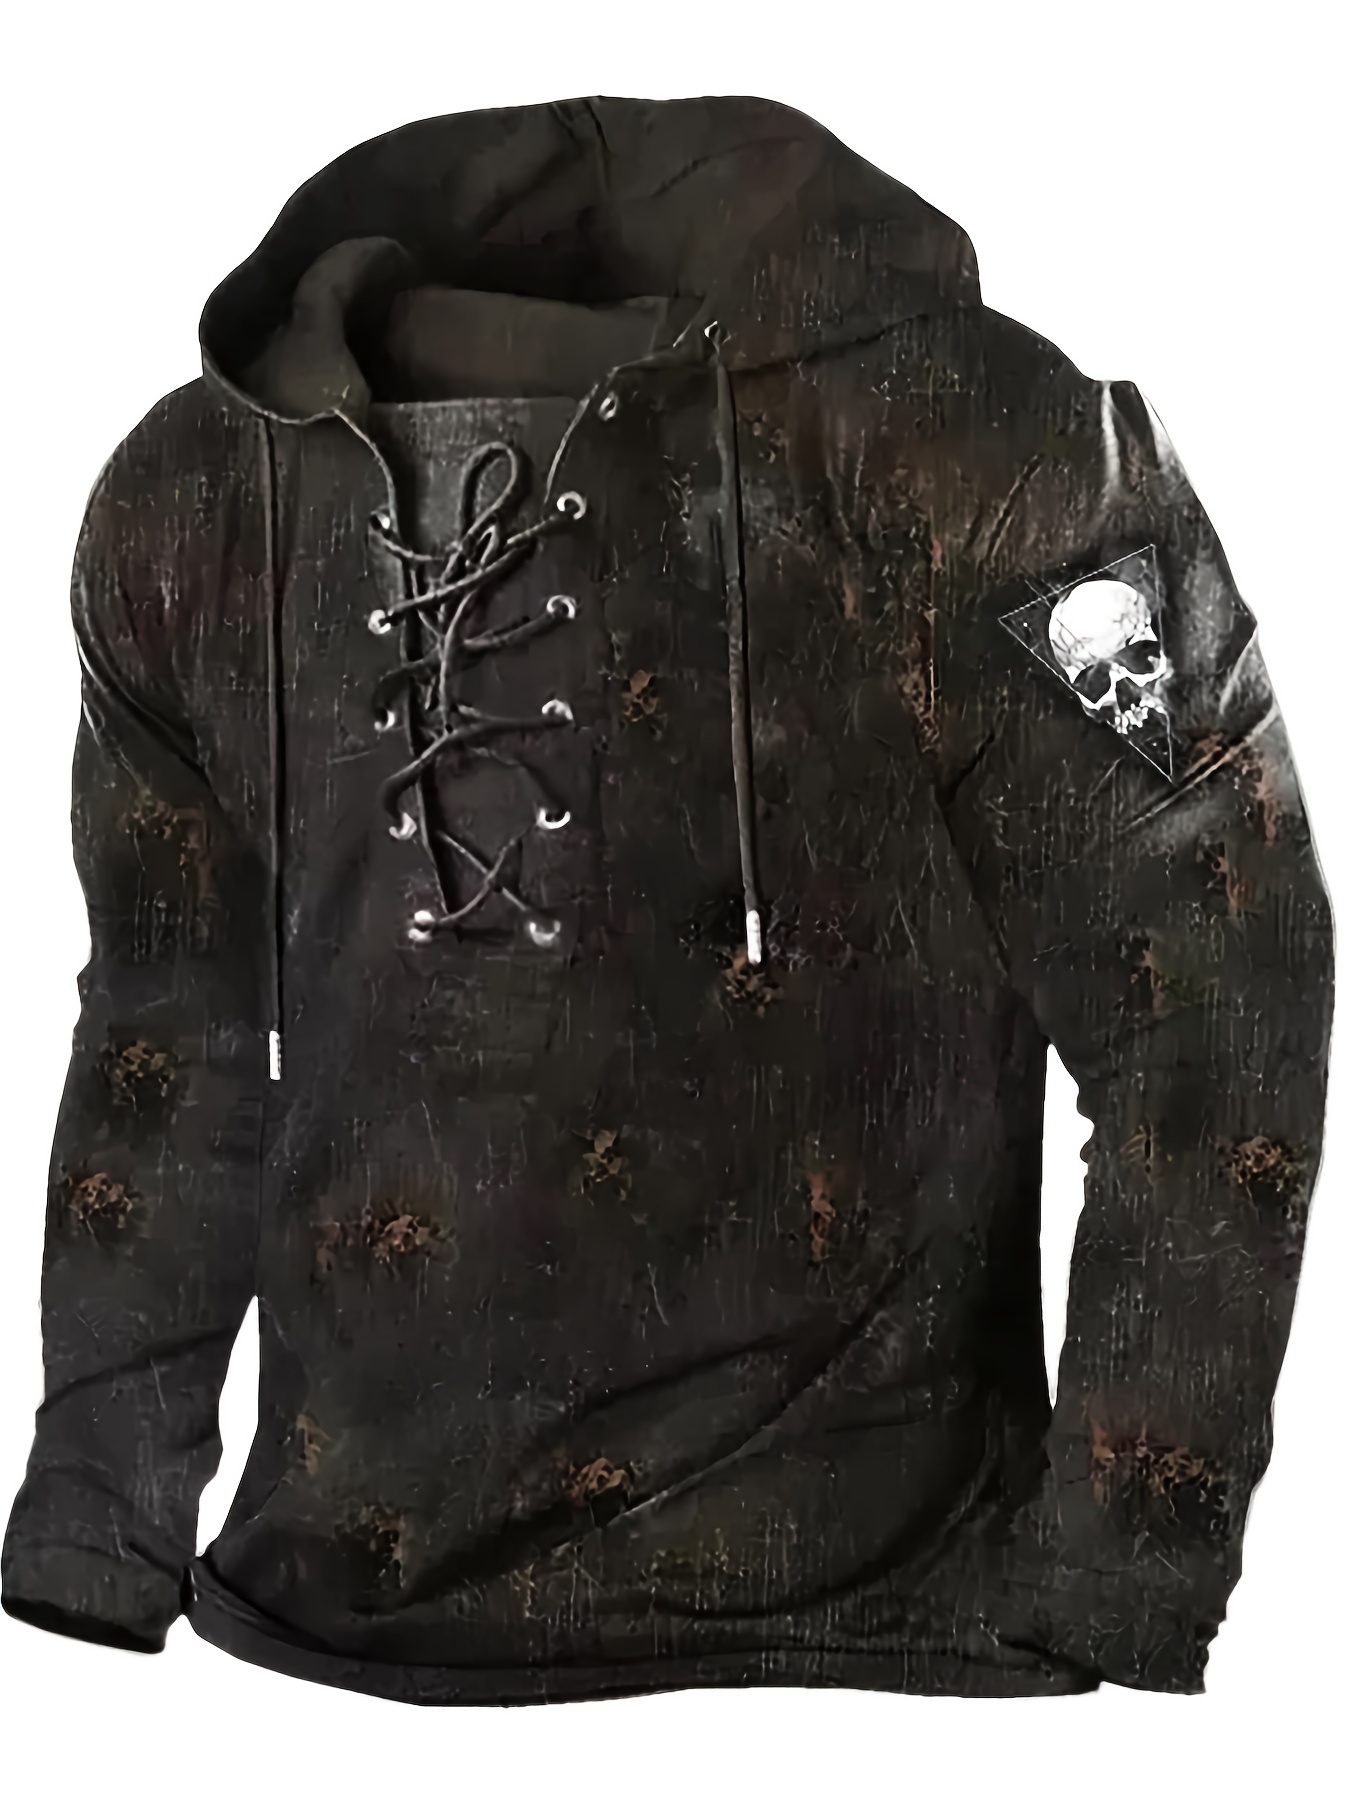 retro lace up gothic style hoodies for men mens casual graphic design hooded sweatshirt streetwear for winter fall as gifts details 7